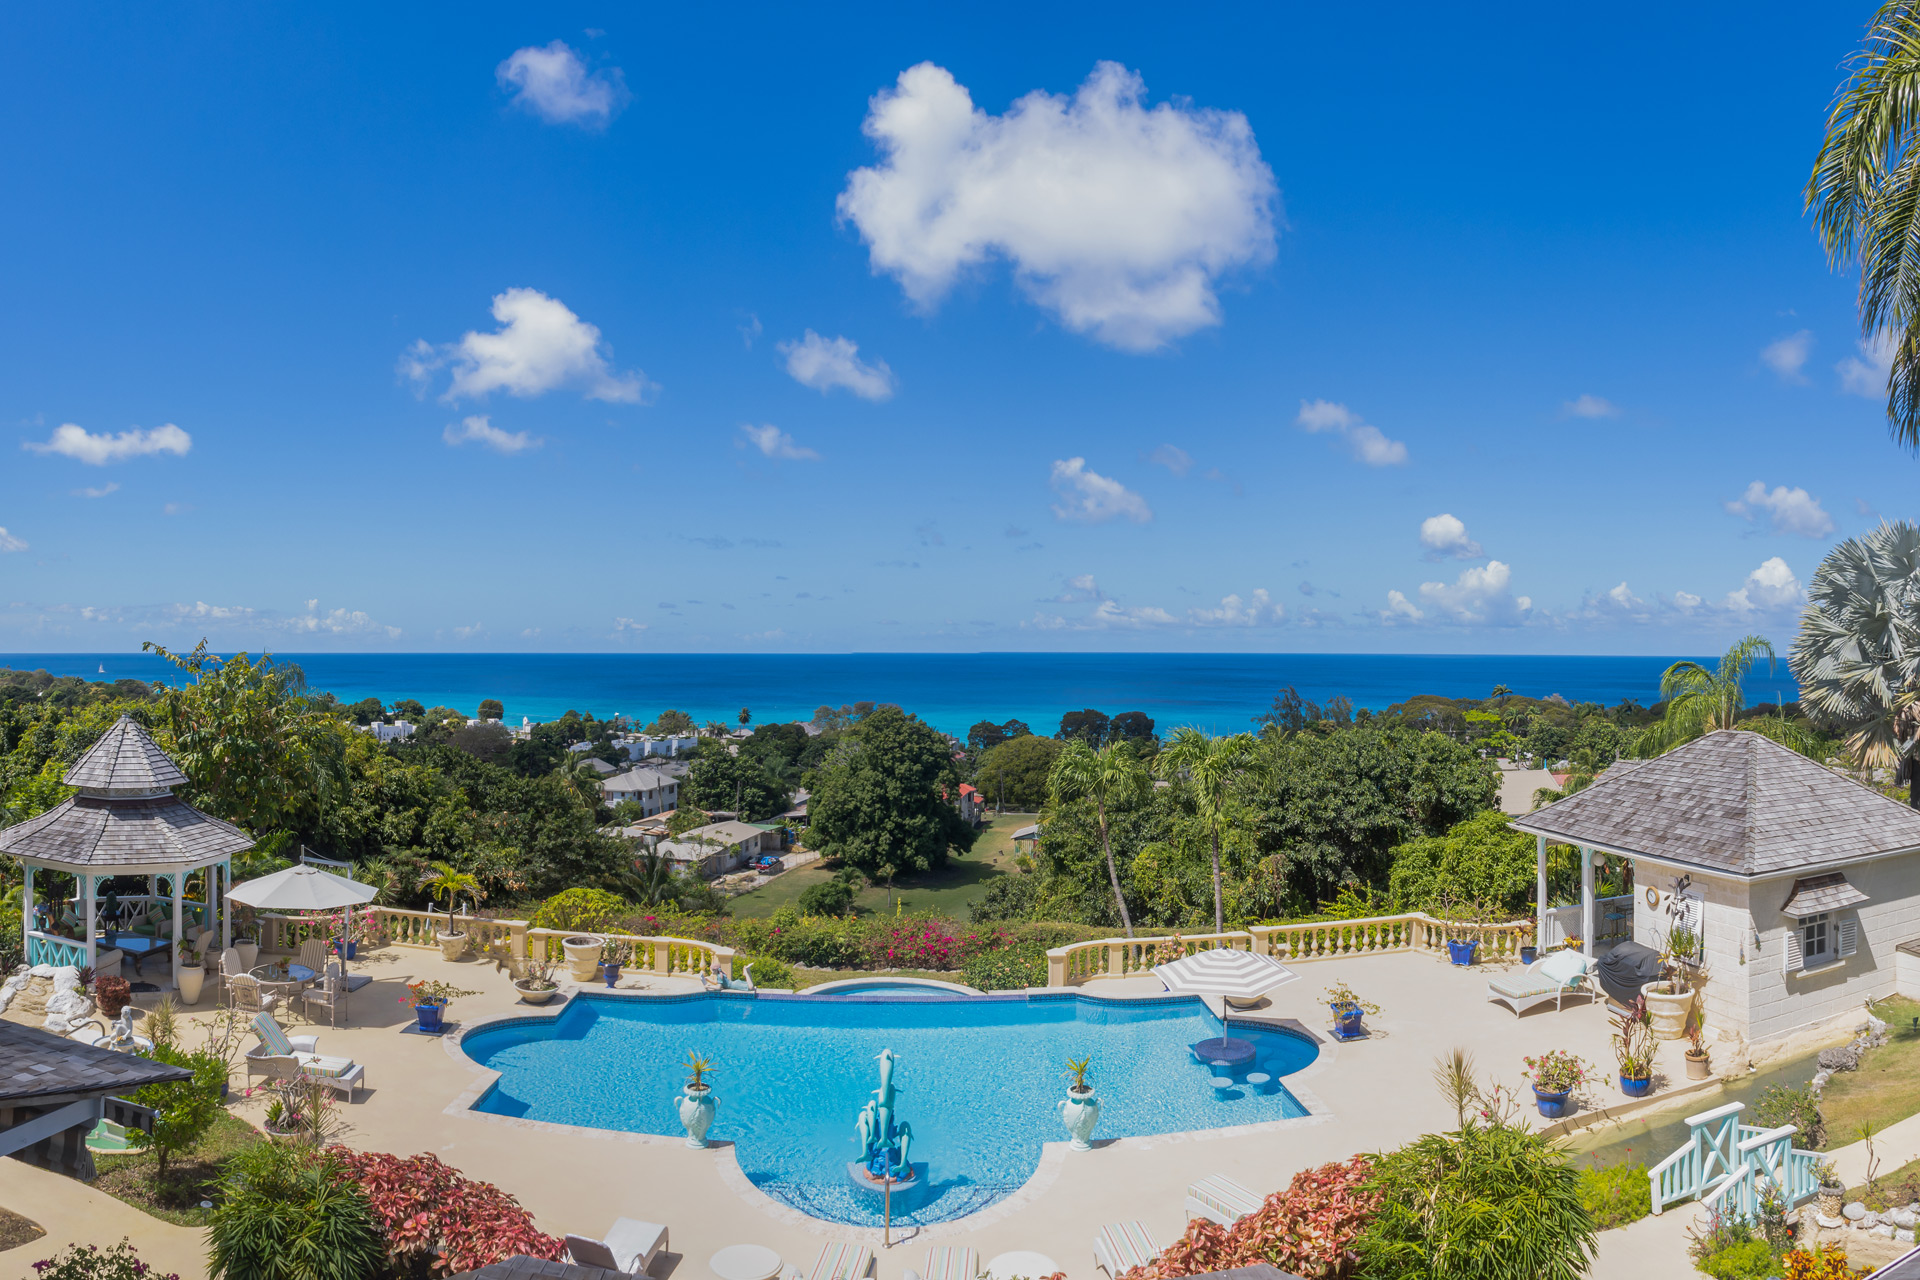 Garden with swimming pool, poolhouse and views of the Caribbean Sea.